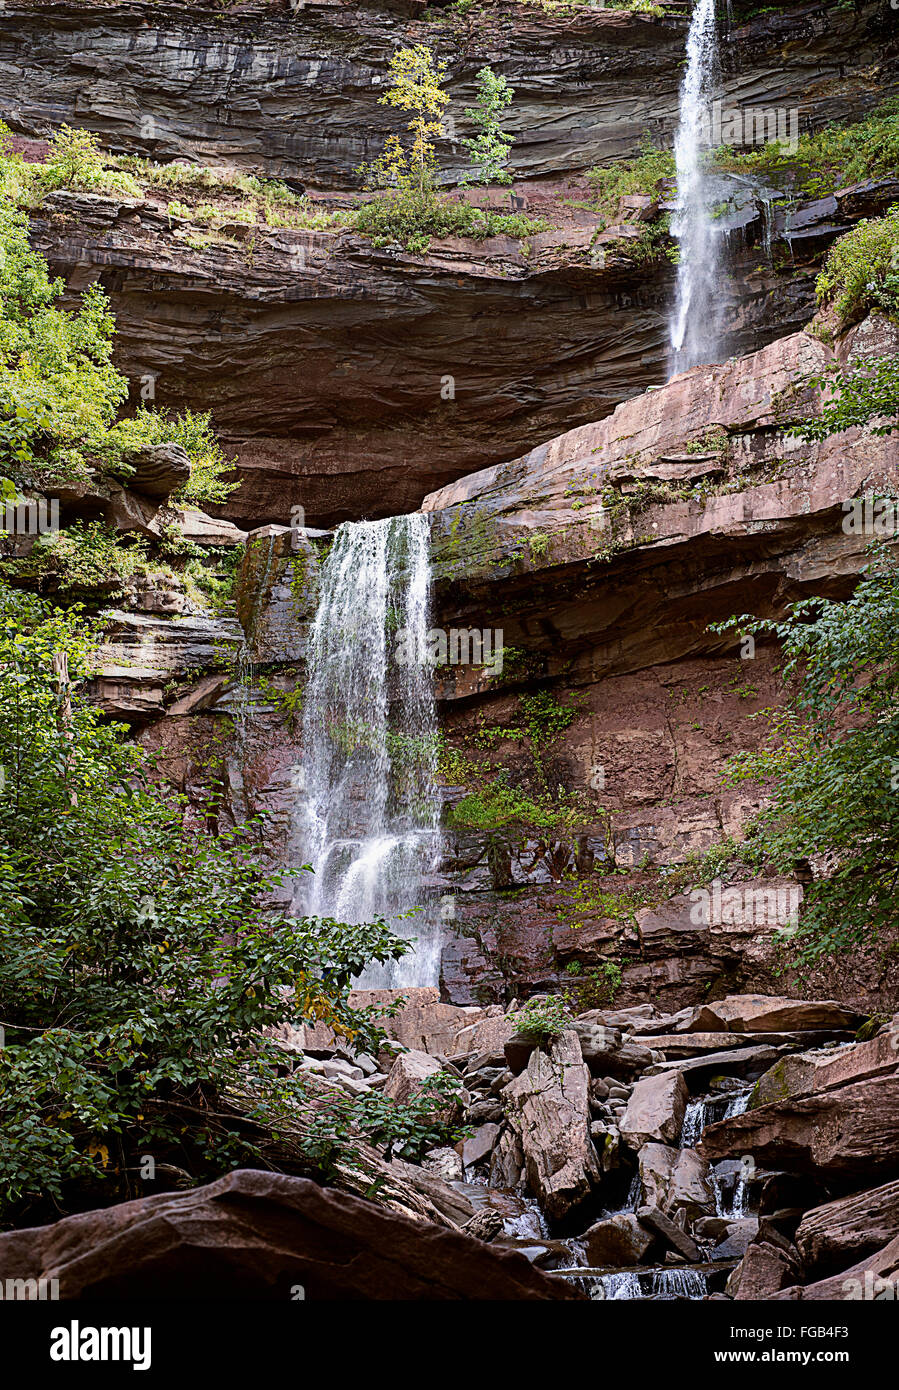 Kaaterskill Falls in the Catskill mountains, new york Stock Photo